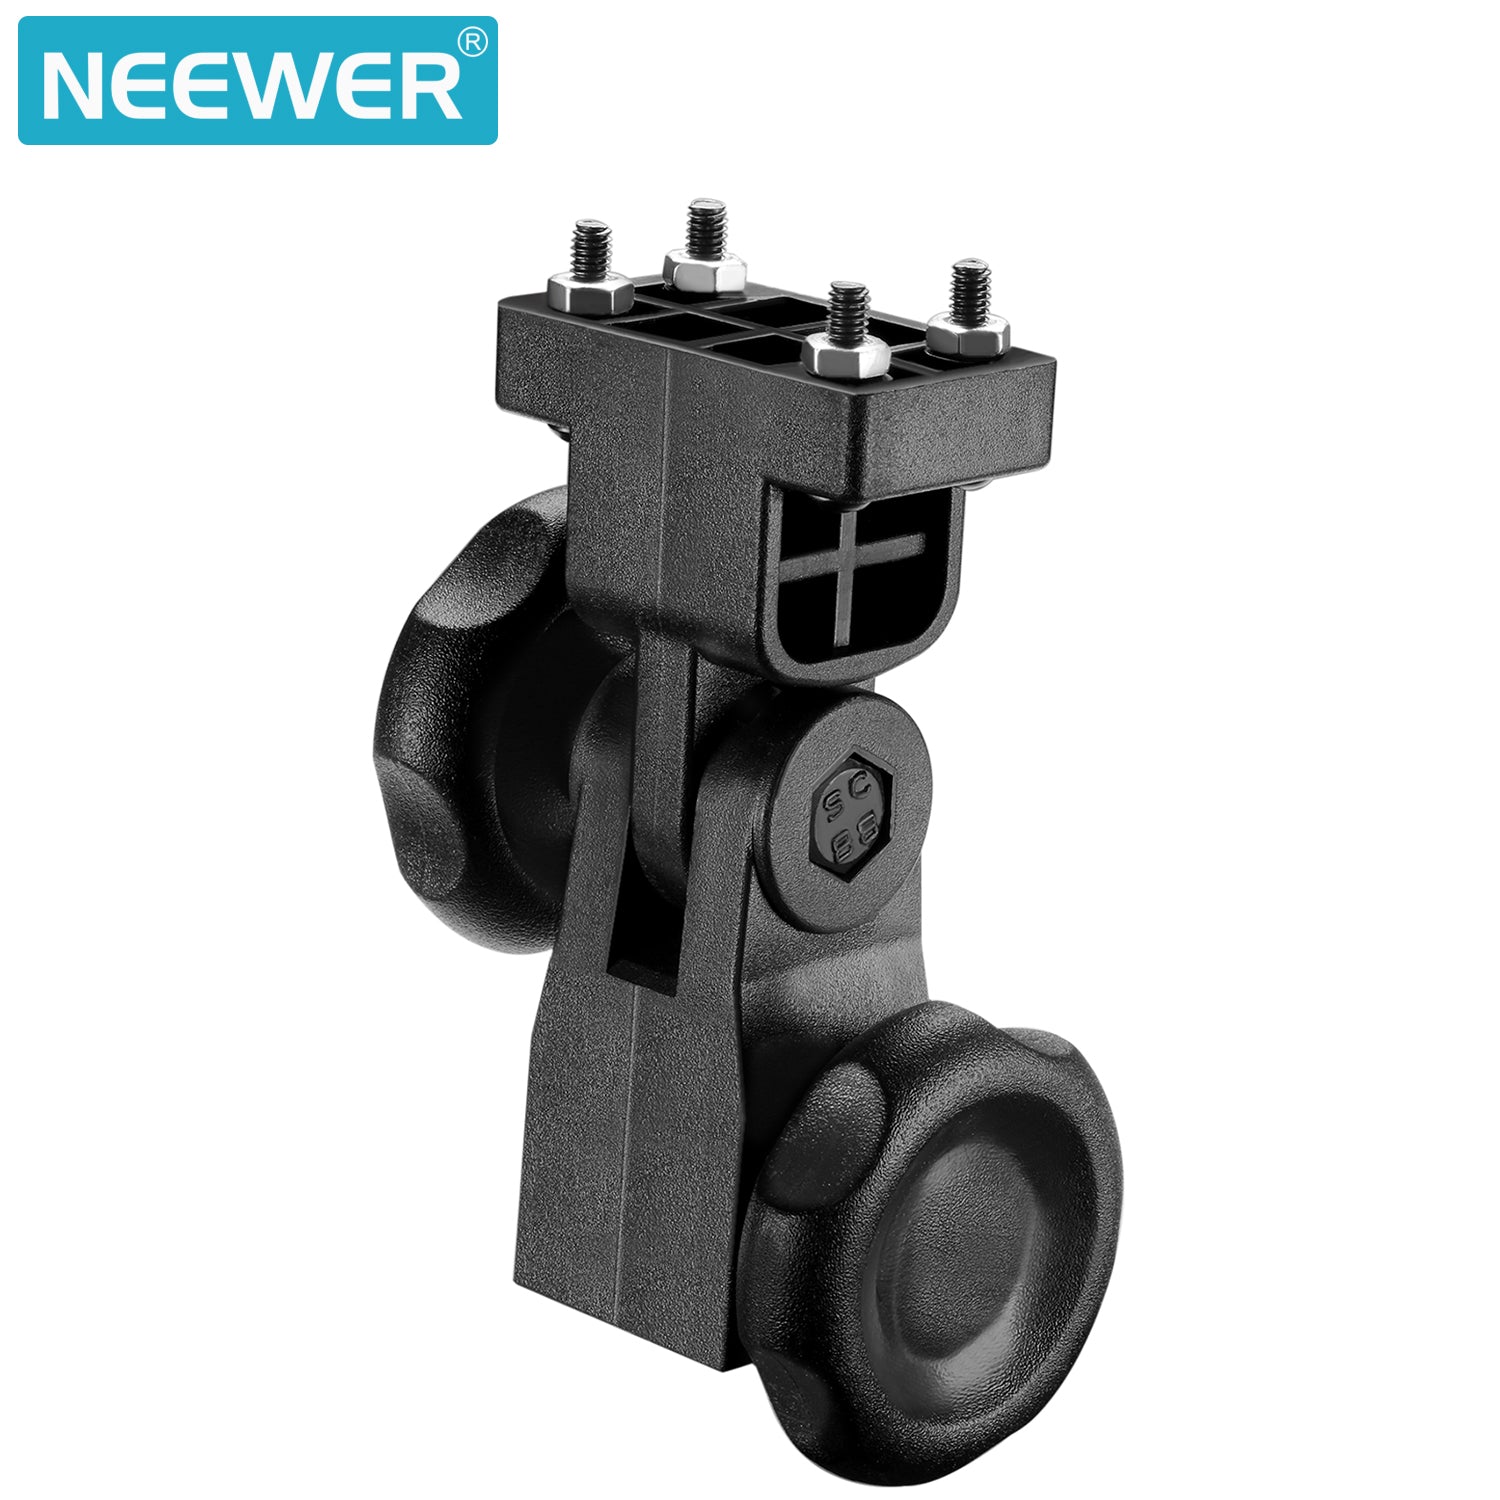 NEEWER Webcam Stand Camera Mount with C Clamp, 35.4